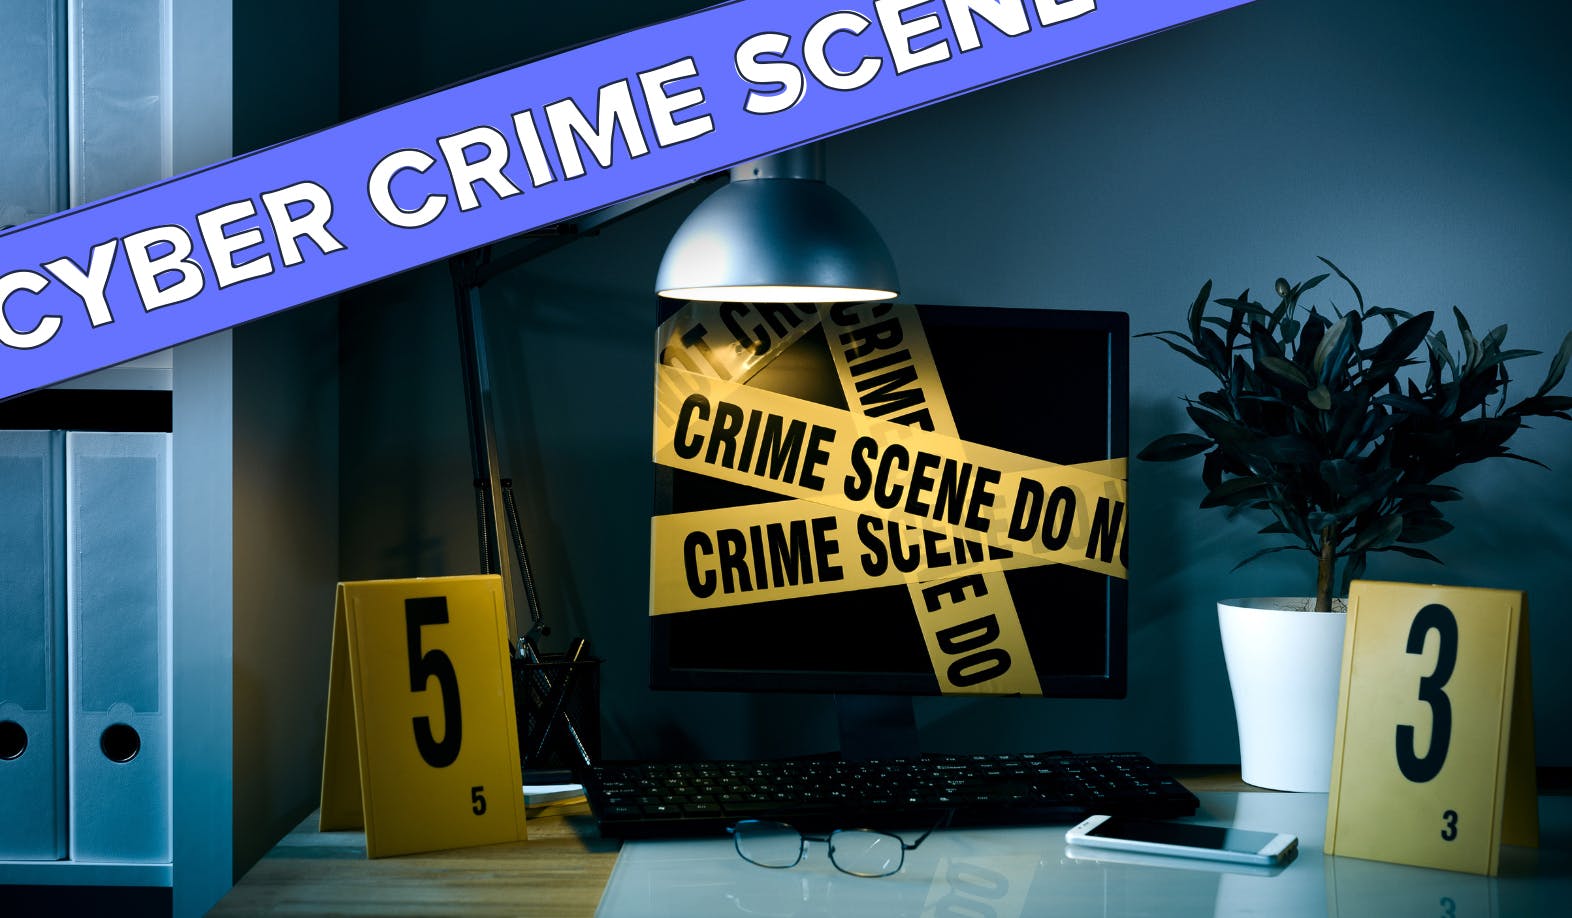 A photograph of a desk with office binders on the left. A desktop, keyboard, glasses and a phone in the middle. And a plant on the left. This working place is covered with yellow crime scene numbers and tape. The image has a dark and grim feel to it. The is also a StartMail brand illustration across the image in the StartMail blue color with the text 'Cyber Crime Scene'.